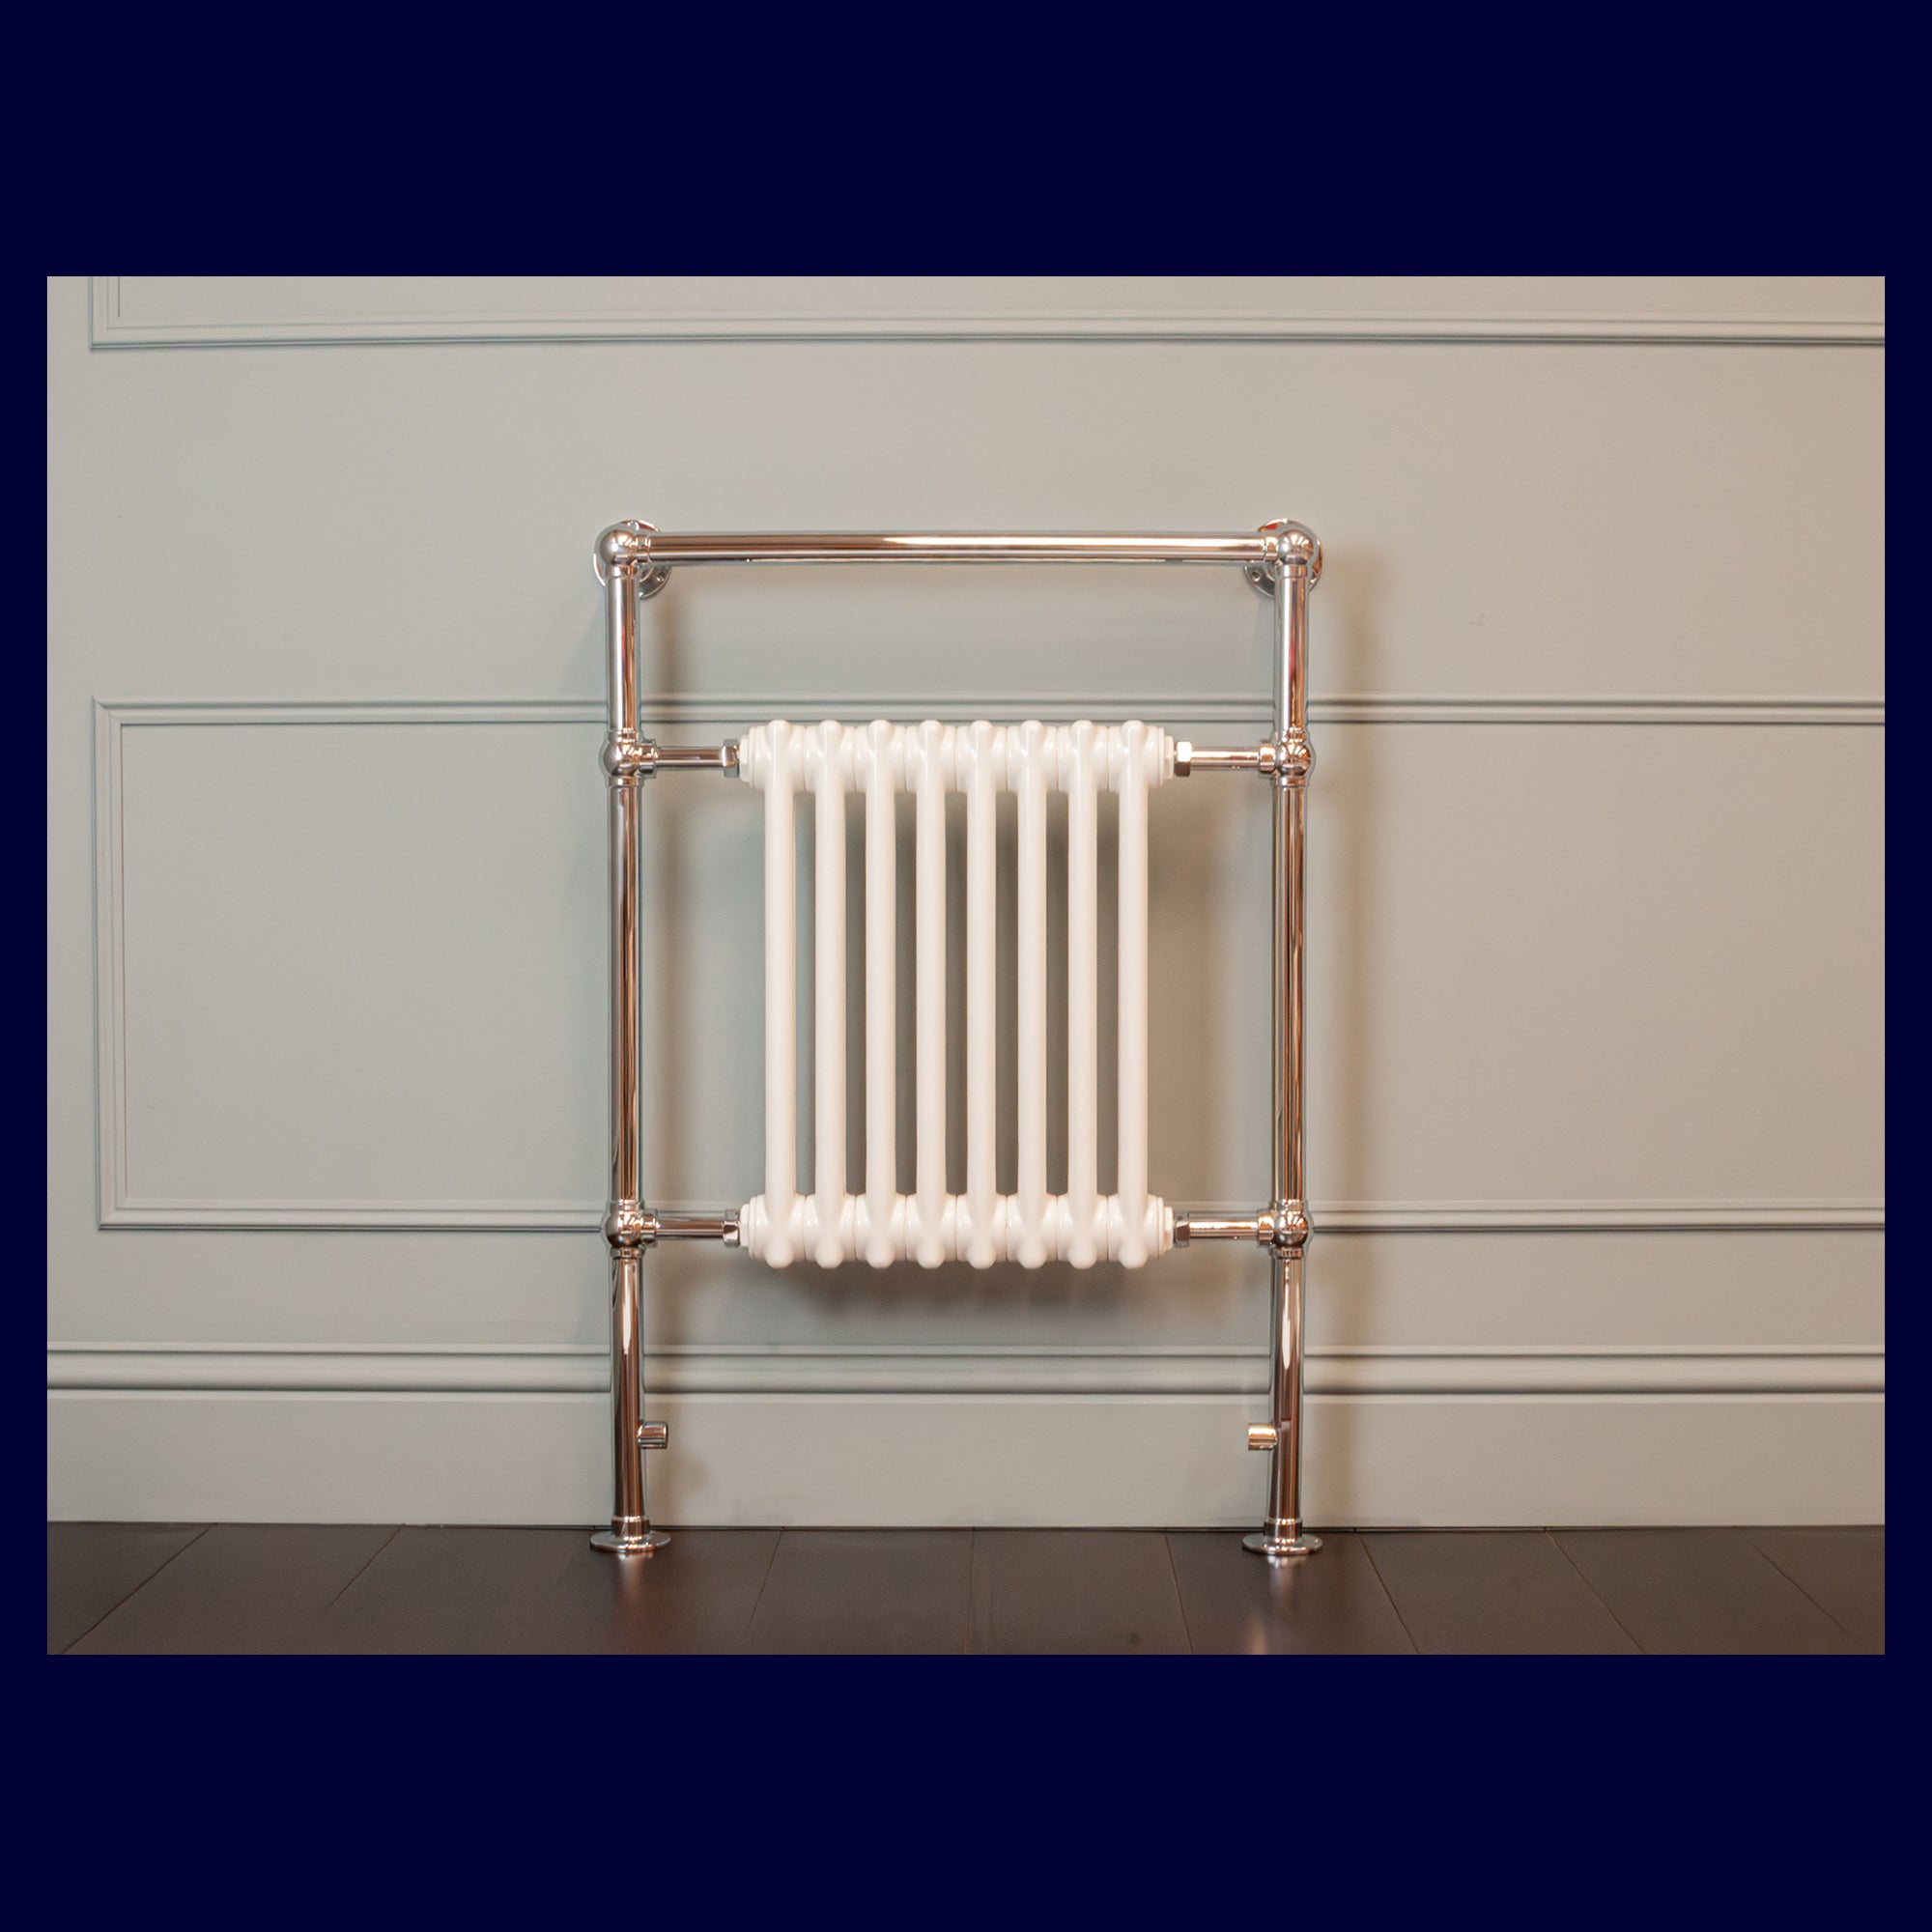 Ex-Display Lonsdale Heated Towel Rail - 952 x 685 - Central Heating Only - Polished Chrome - Rutland London